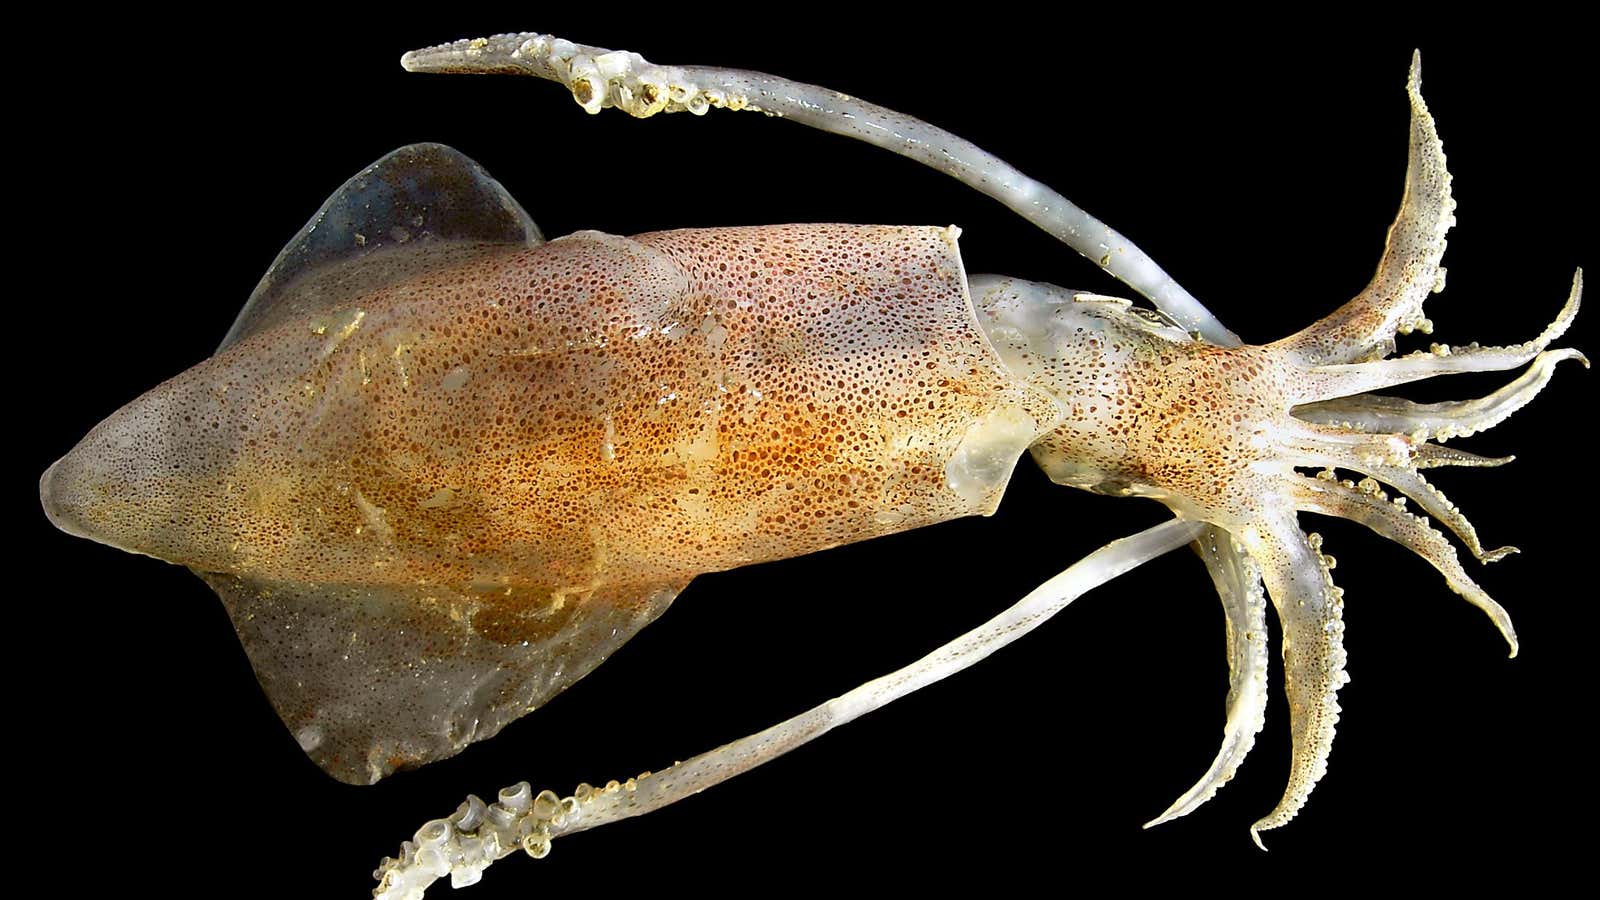 Proteins from the sucker ring teeth of the European common squid have made self-healing fabrics possible.